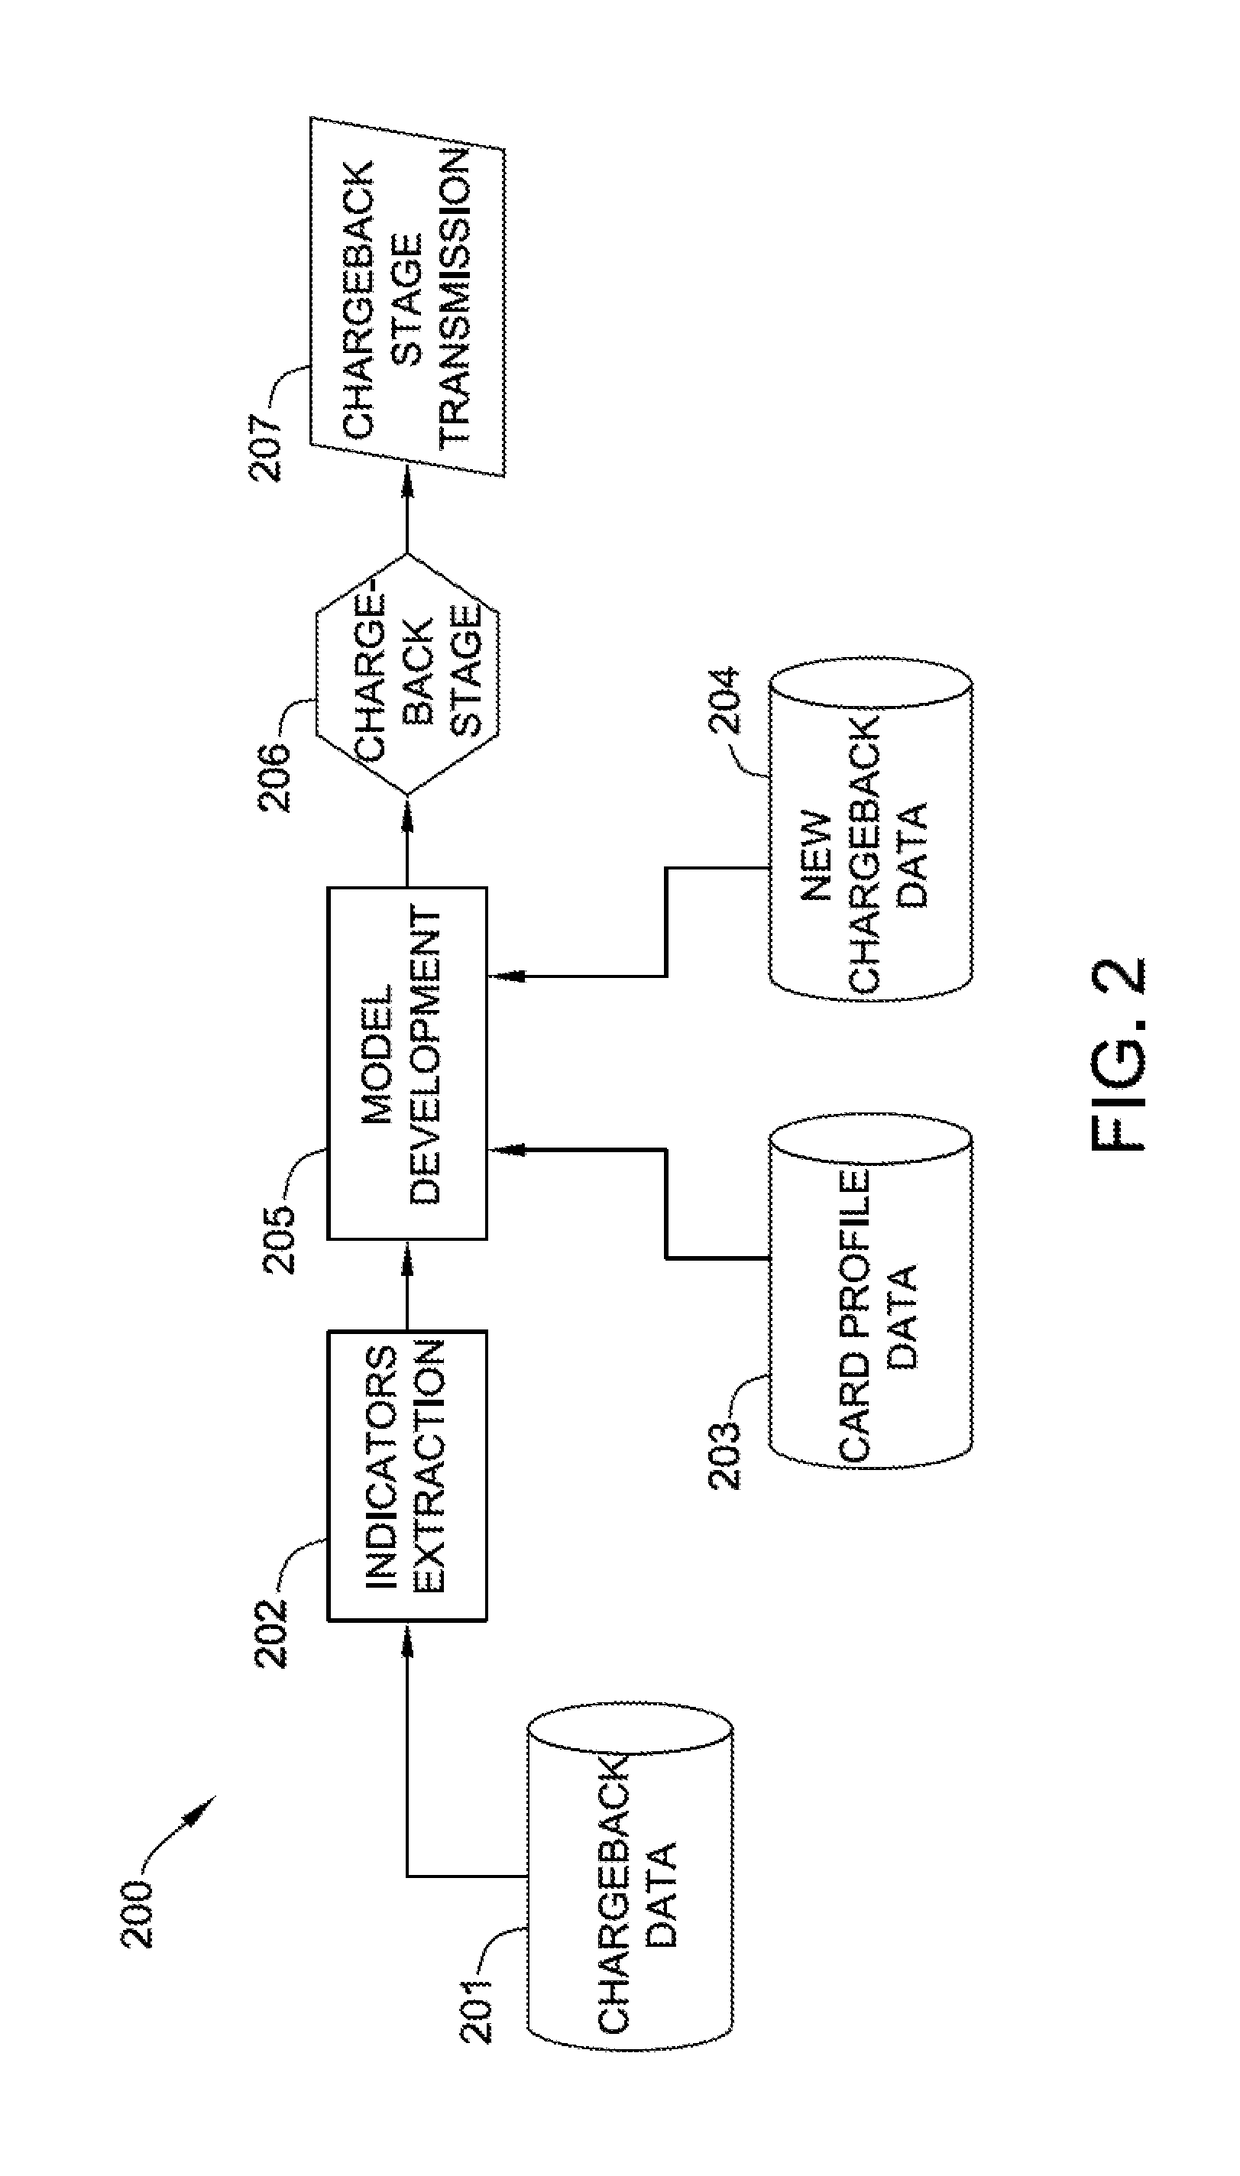 Systems and methods for predicting chargeback stages